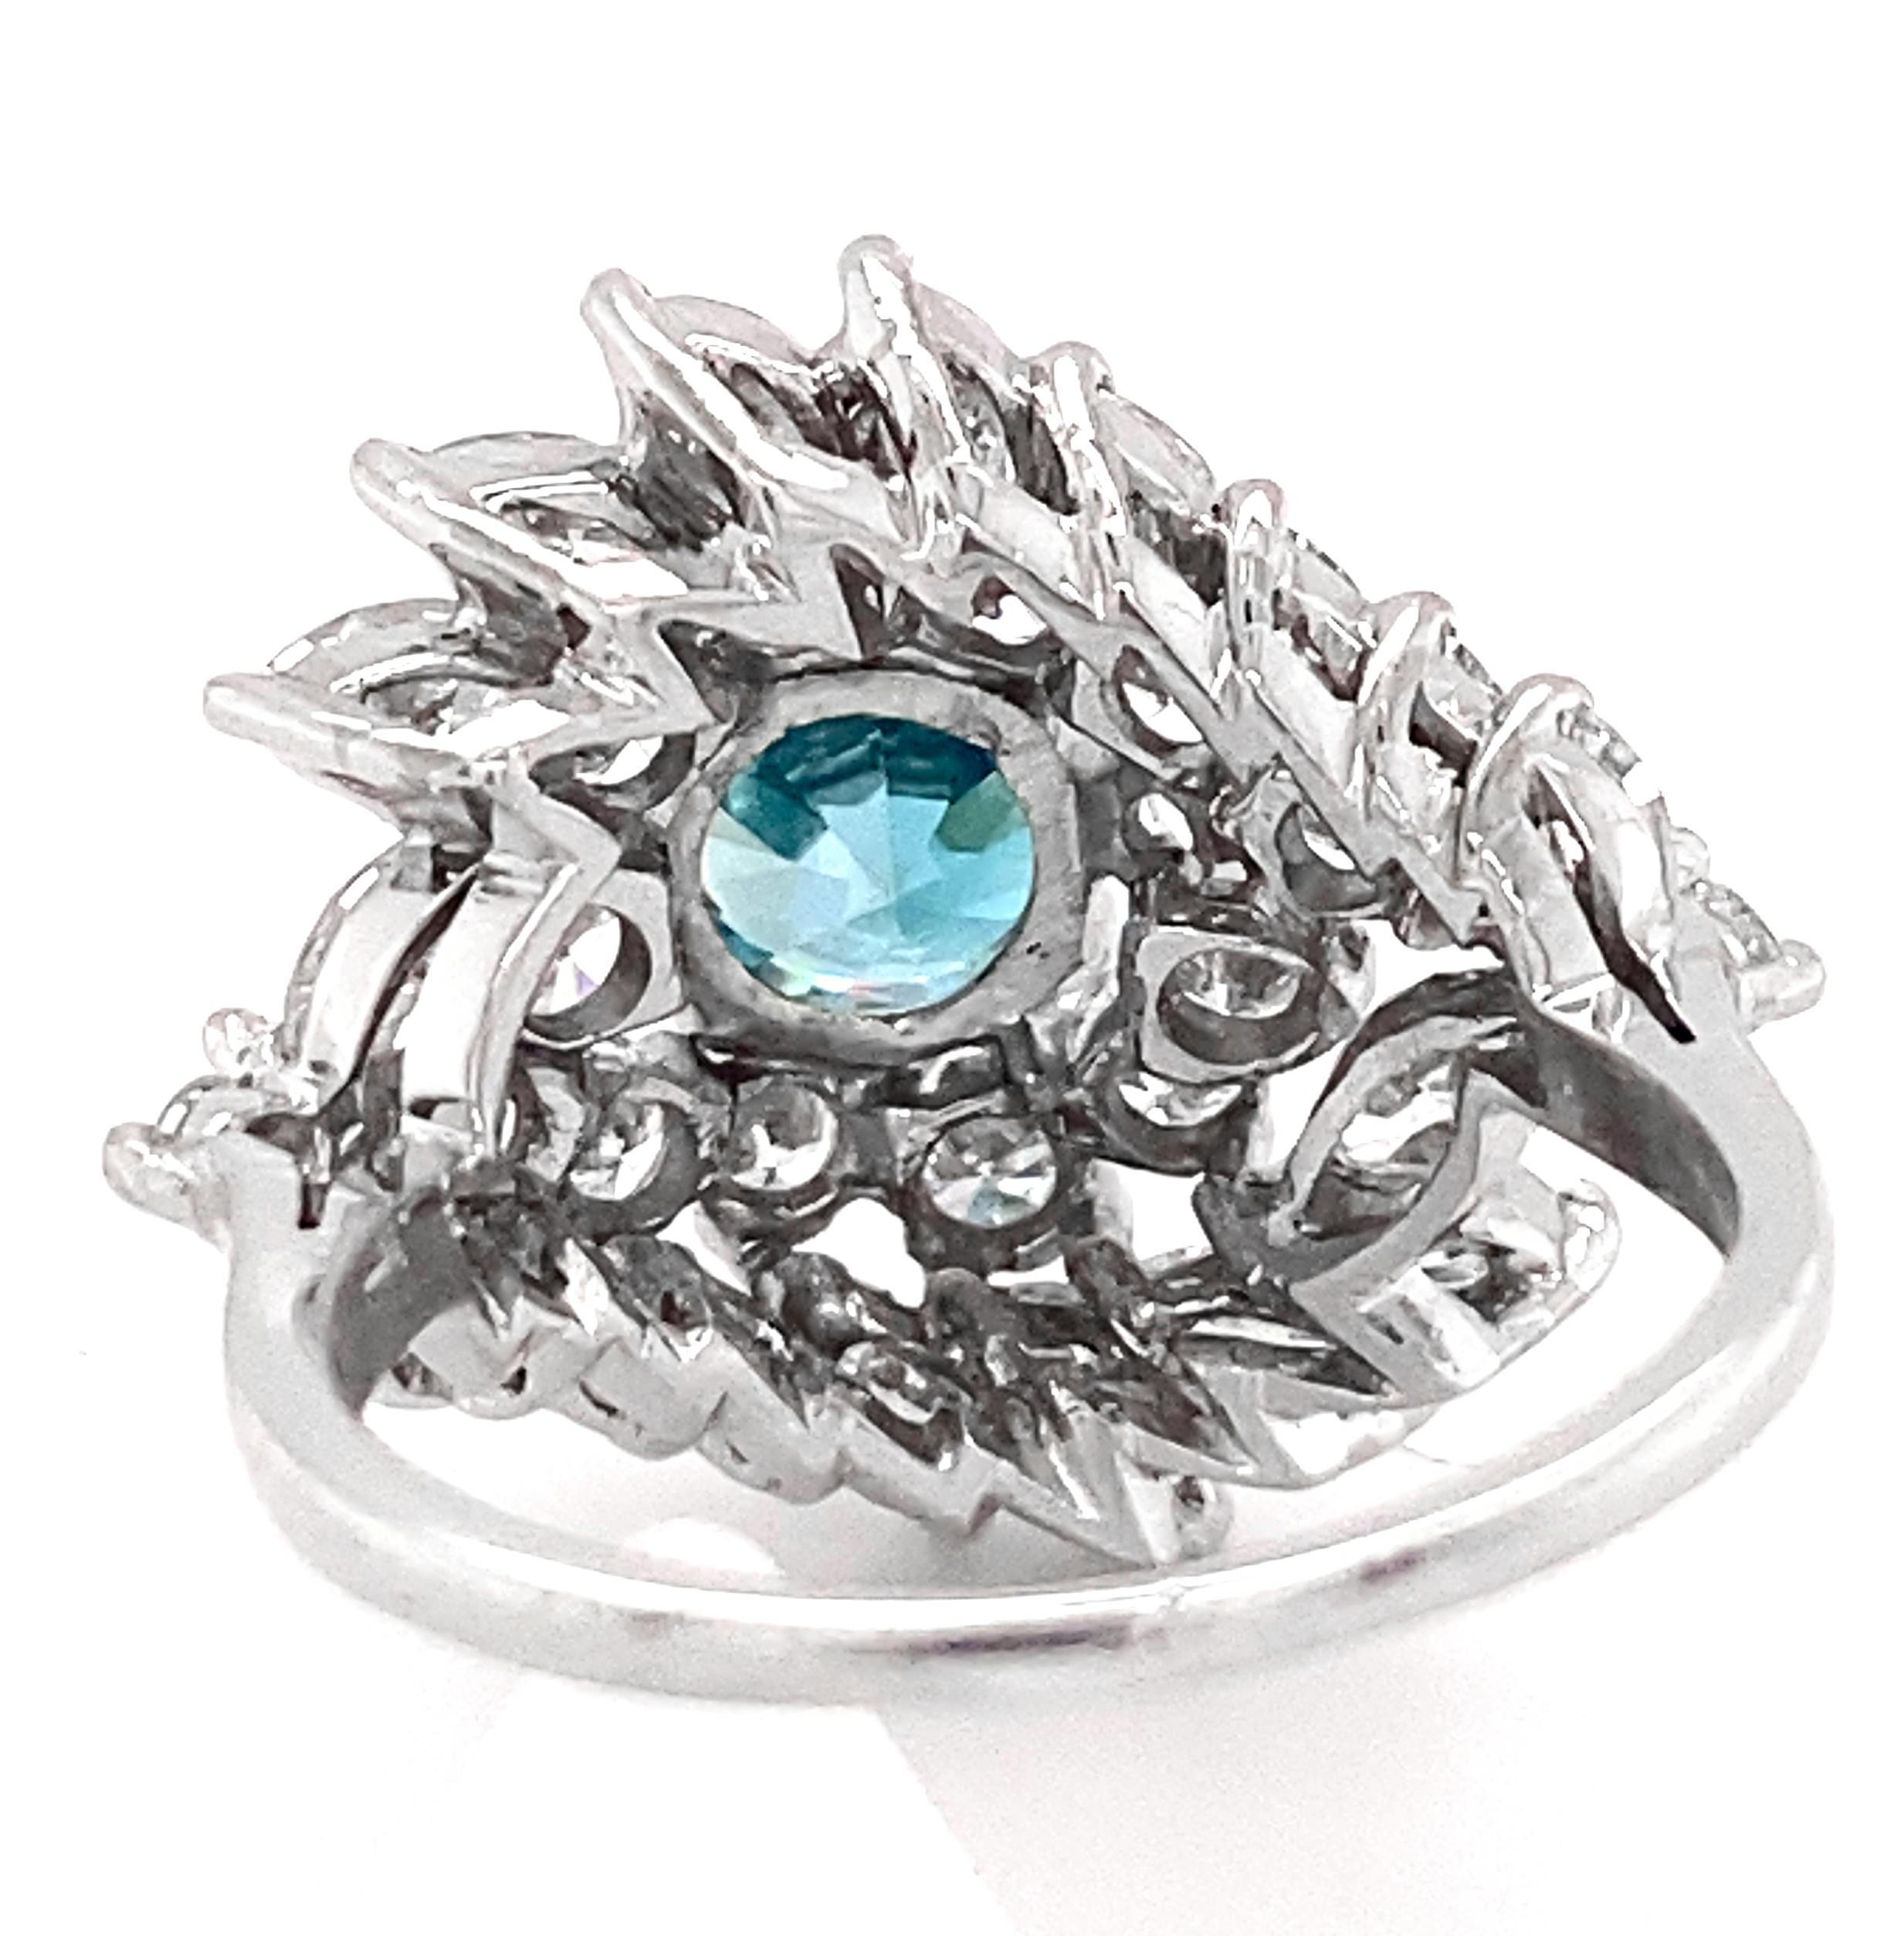 2.4 Carat Diamond Whirlpool Platinum Cocktail Ring with Blue Zircon, circa 1960 In Excellent Condition For Sale In Sherman Oaks, CA